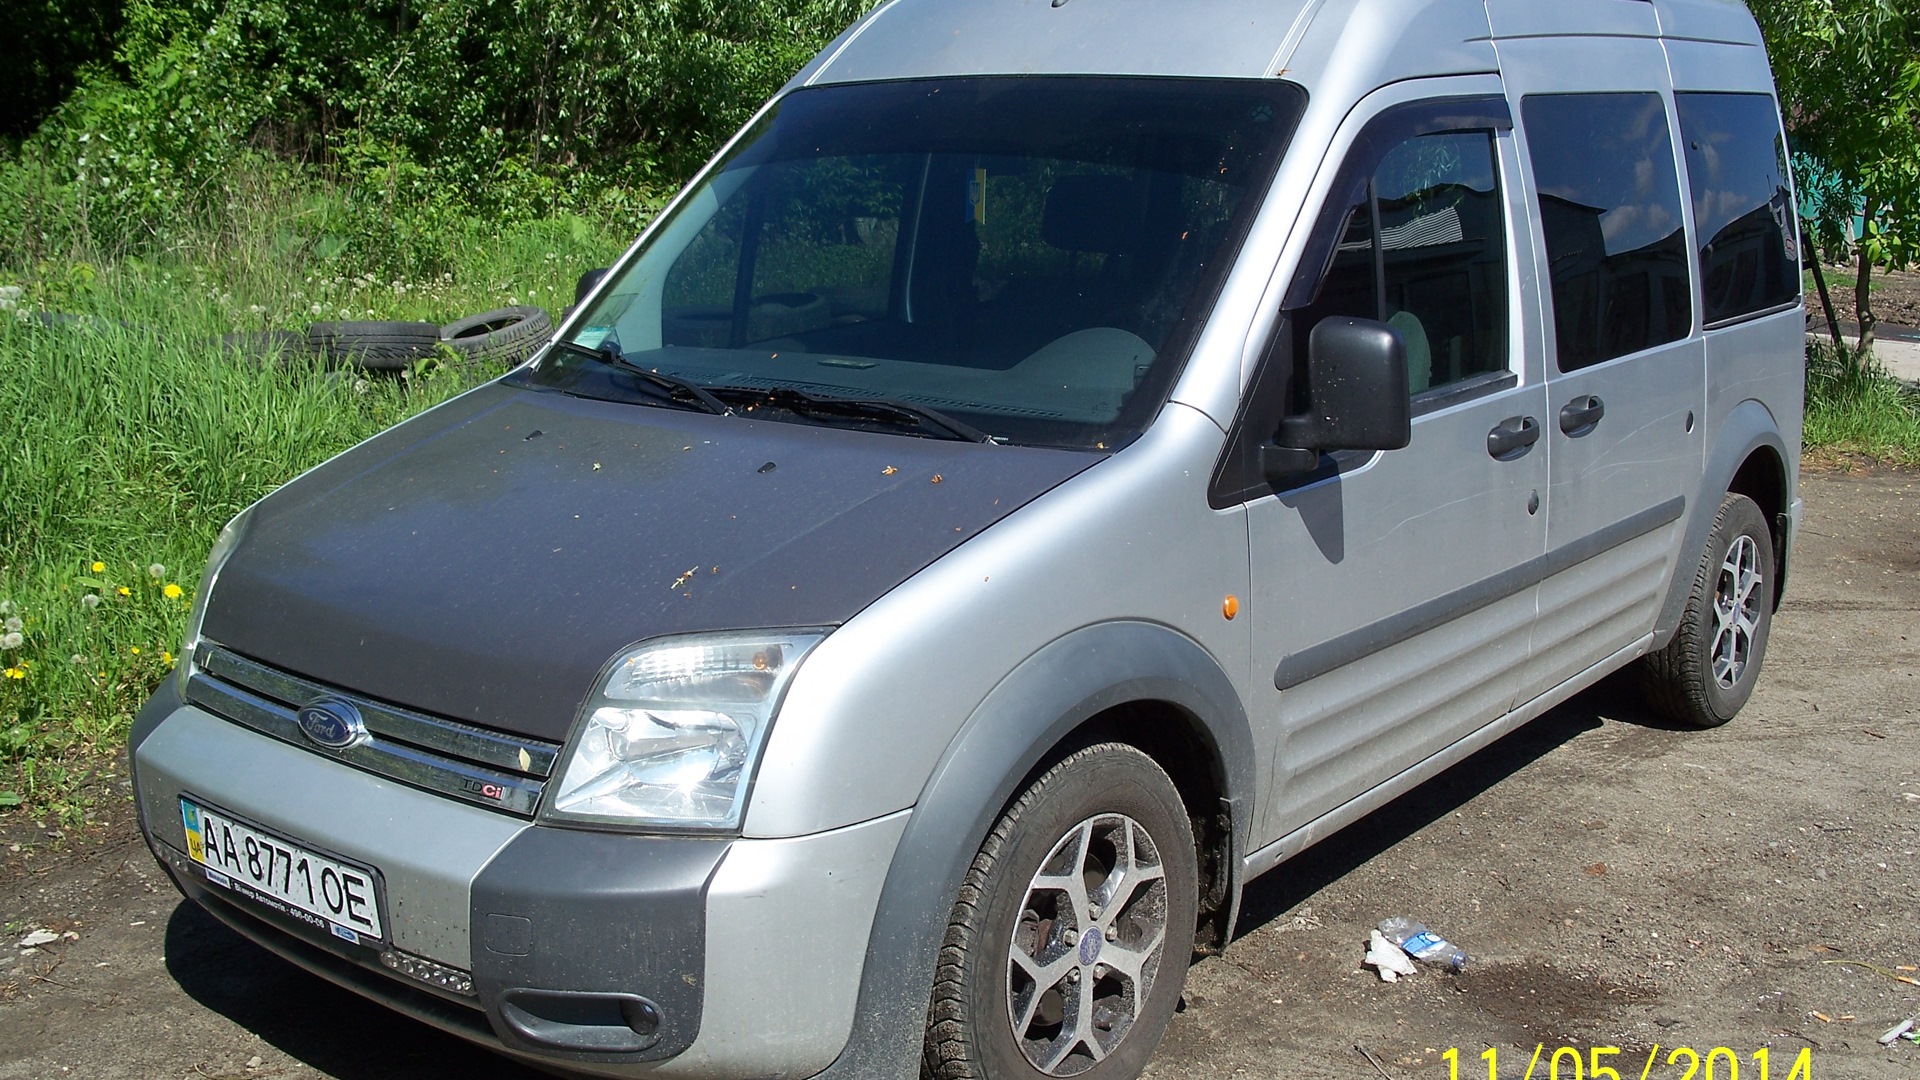 Форд транзит коннект дизель 1.8. Форд Транзит Коннект 2008. Ford Transit connect 1.8 TDCI. Форд Tourneo connect 2008. Ford Transit connect 1.8 (4l-1,796-116-5m).